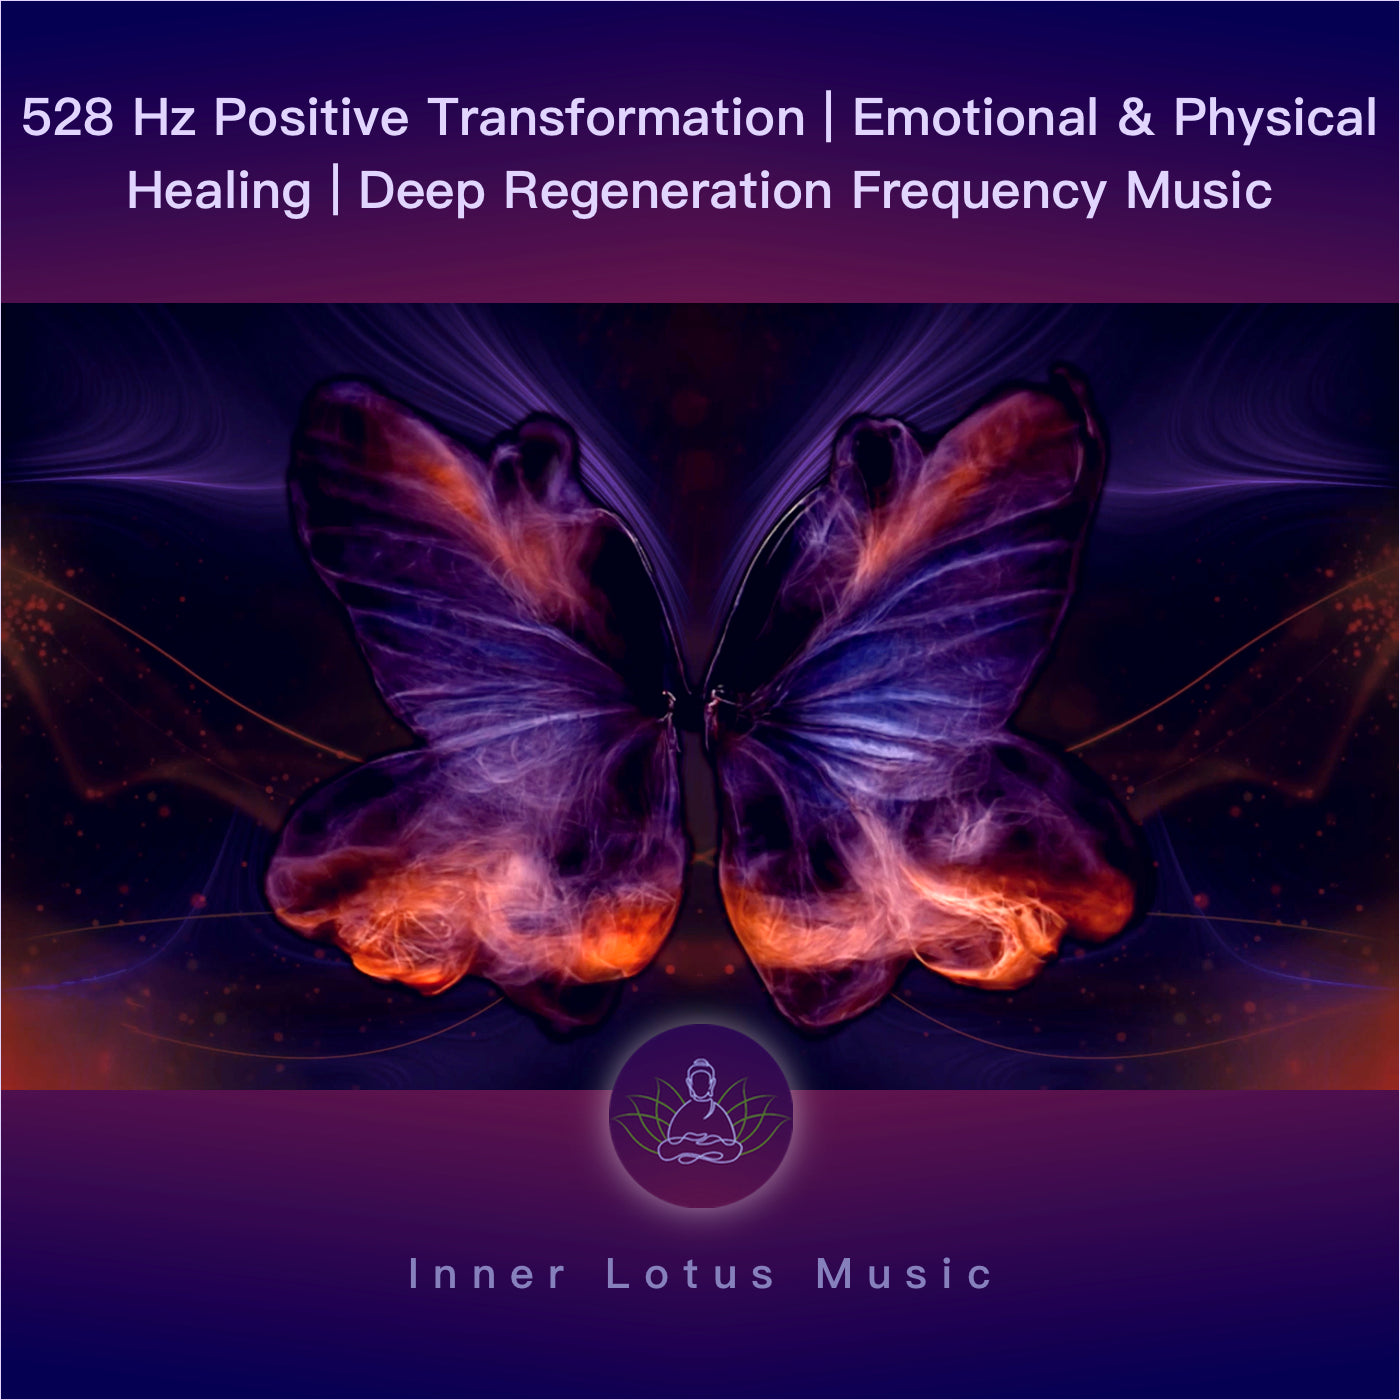 528 Hz Positive Transformation | Emotional & Physical Healing | Deep Regeneration Frequency Music